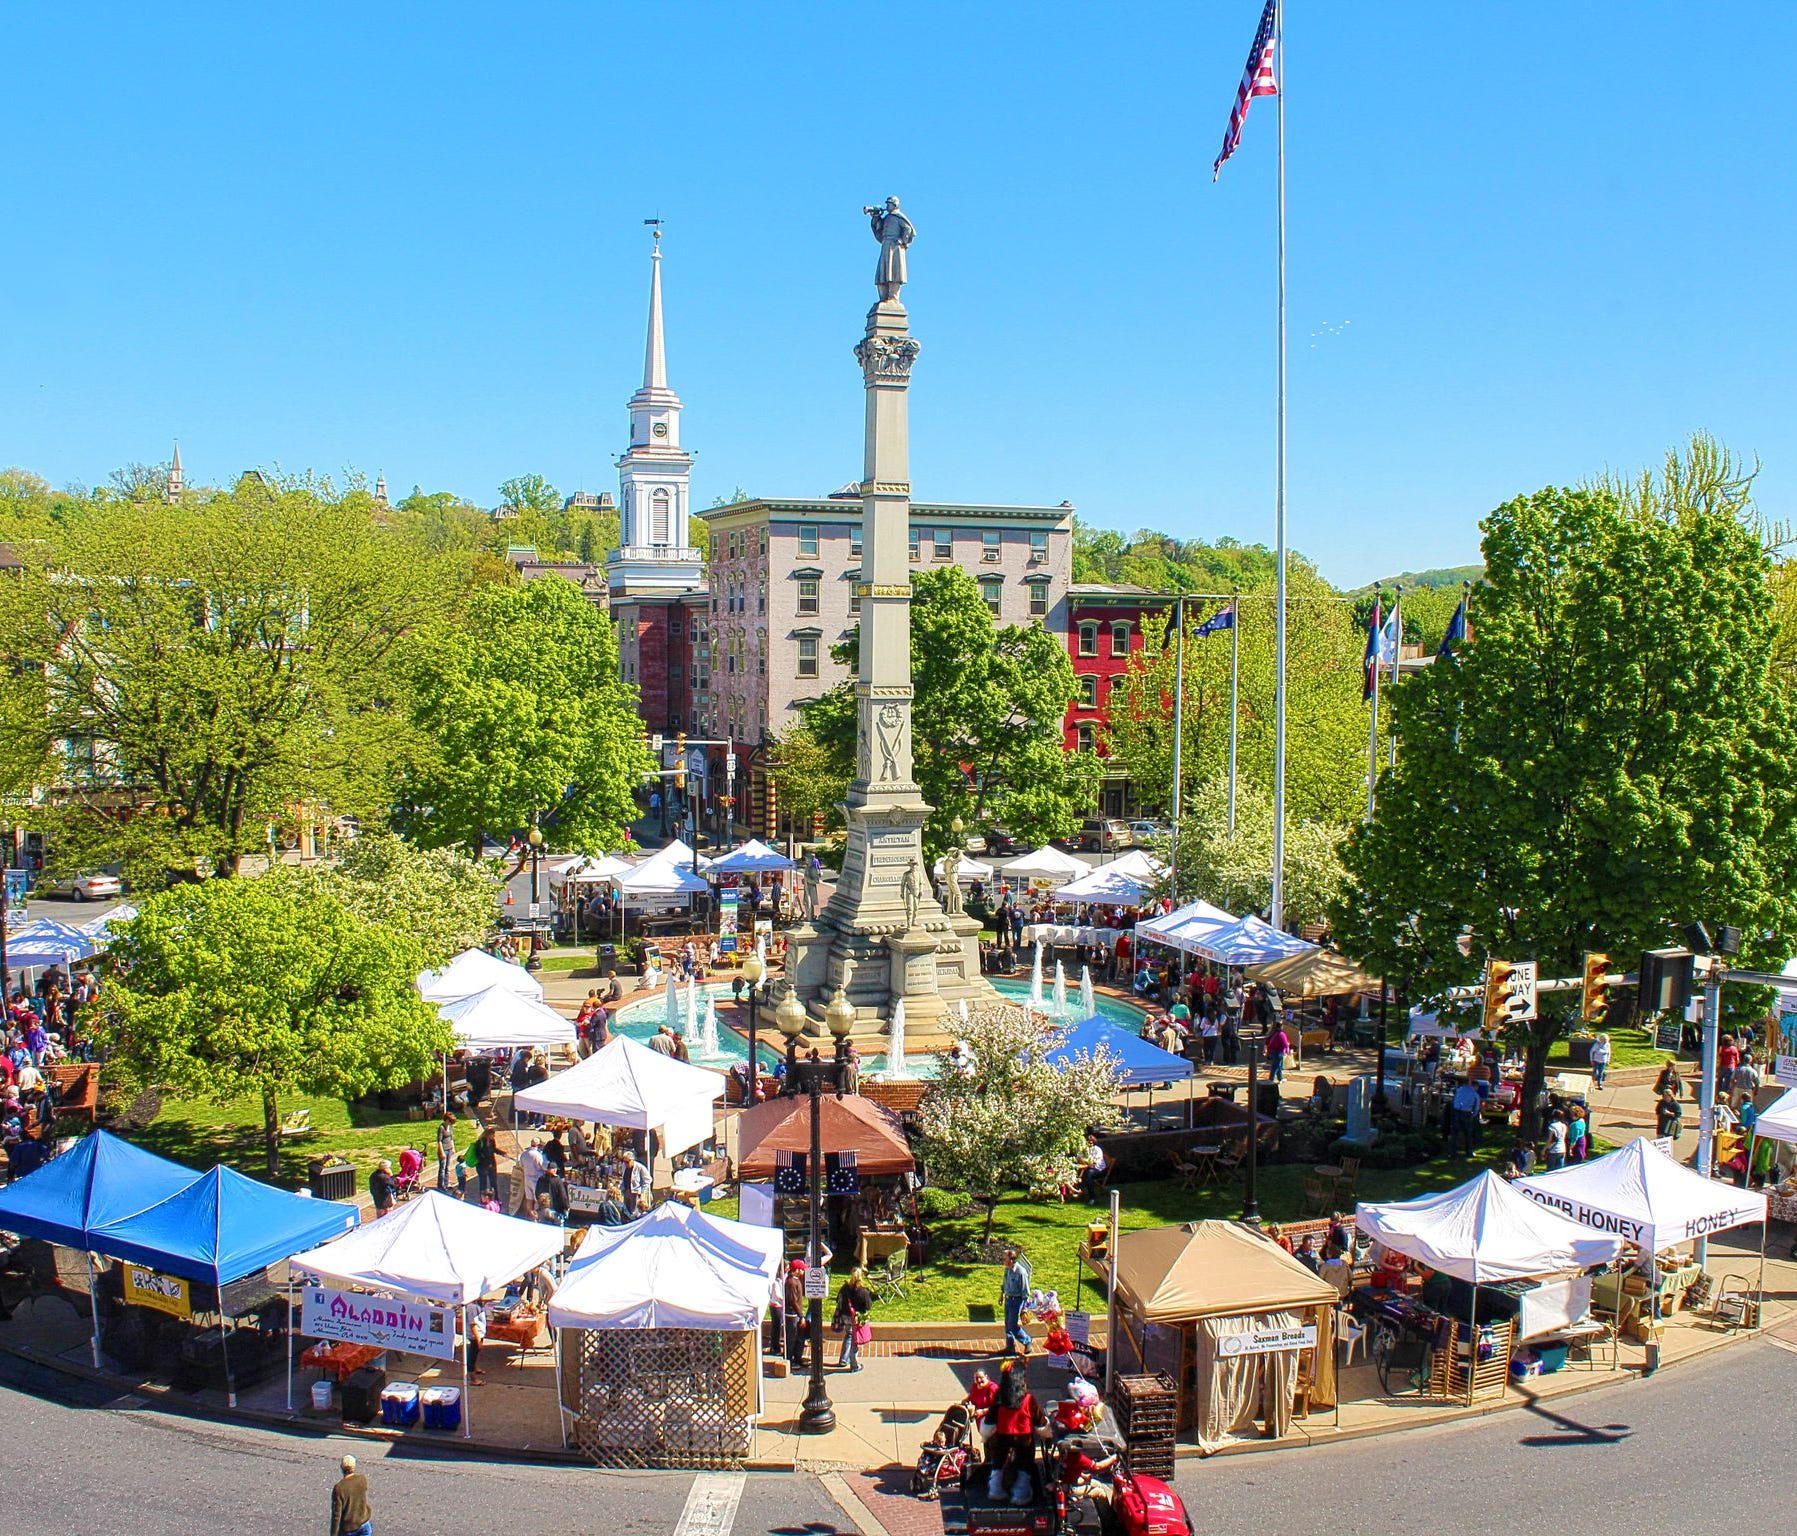 The Easton Farmers' Market opened in 1752 when Easton, Pa. was established, and is said to be the country's longest continually operating farmers market. About 35 vendors, including farms, restaurants, artisans and makers, gather in Centre Square on 